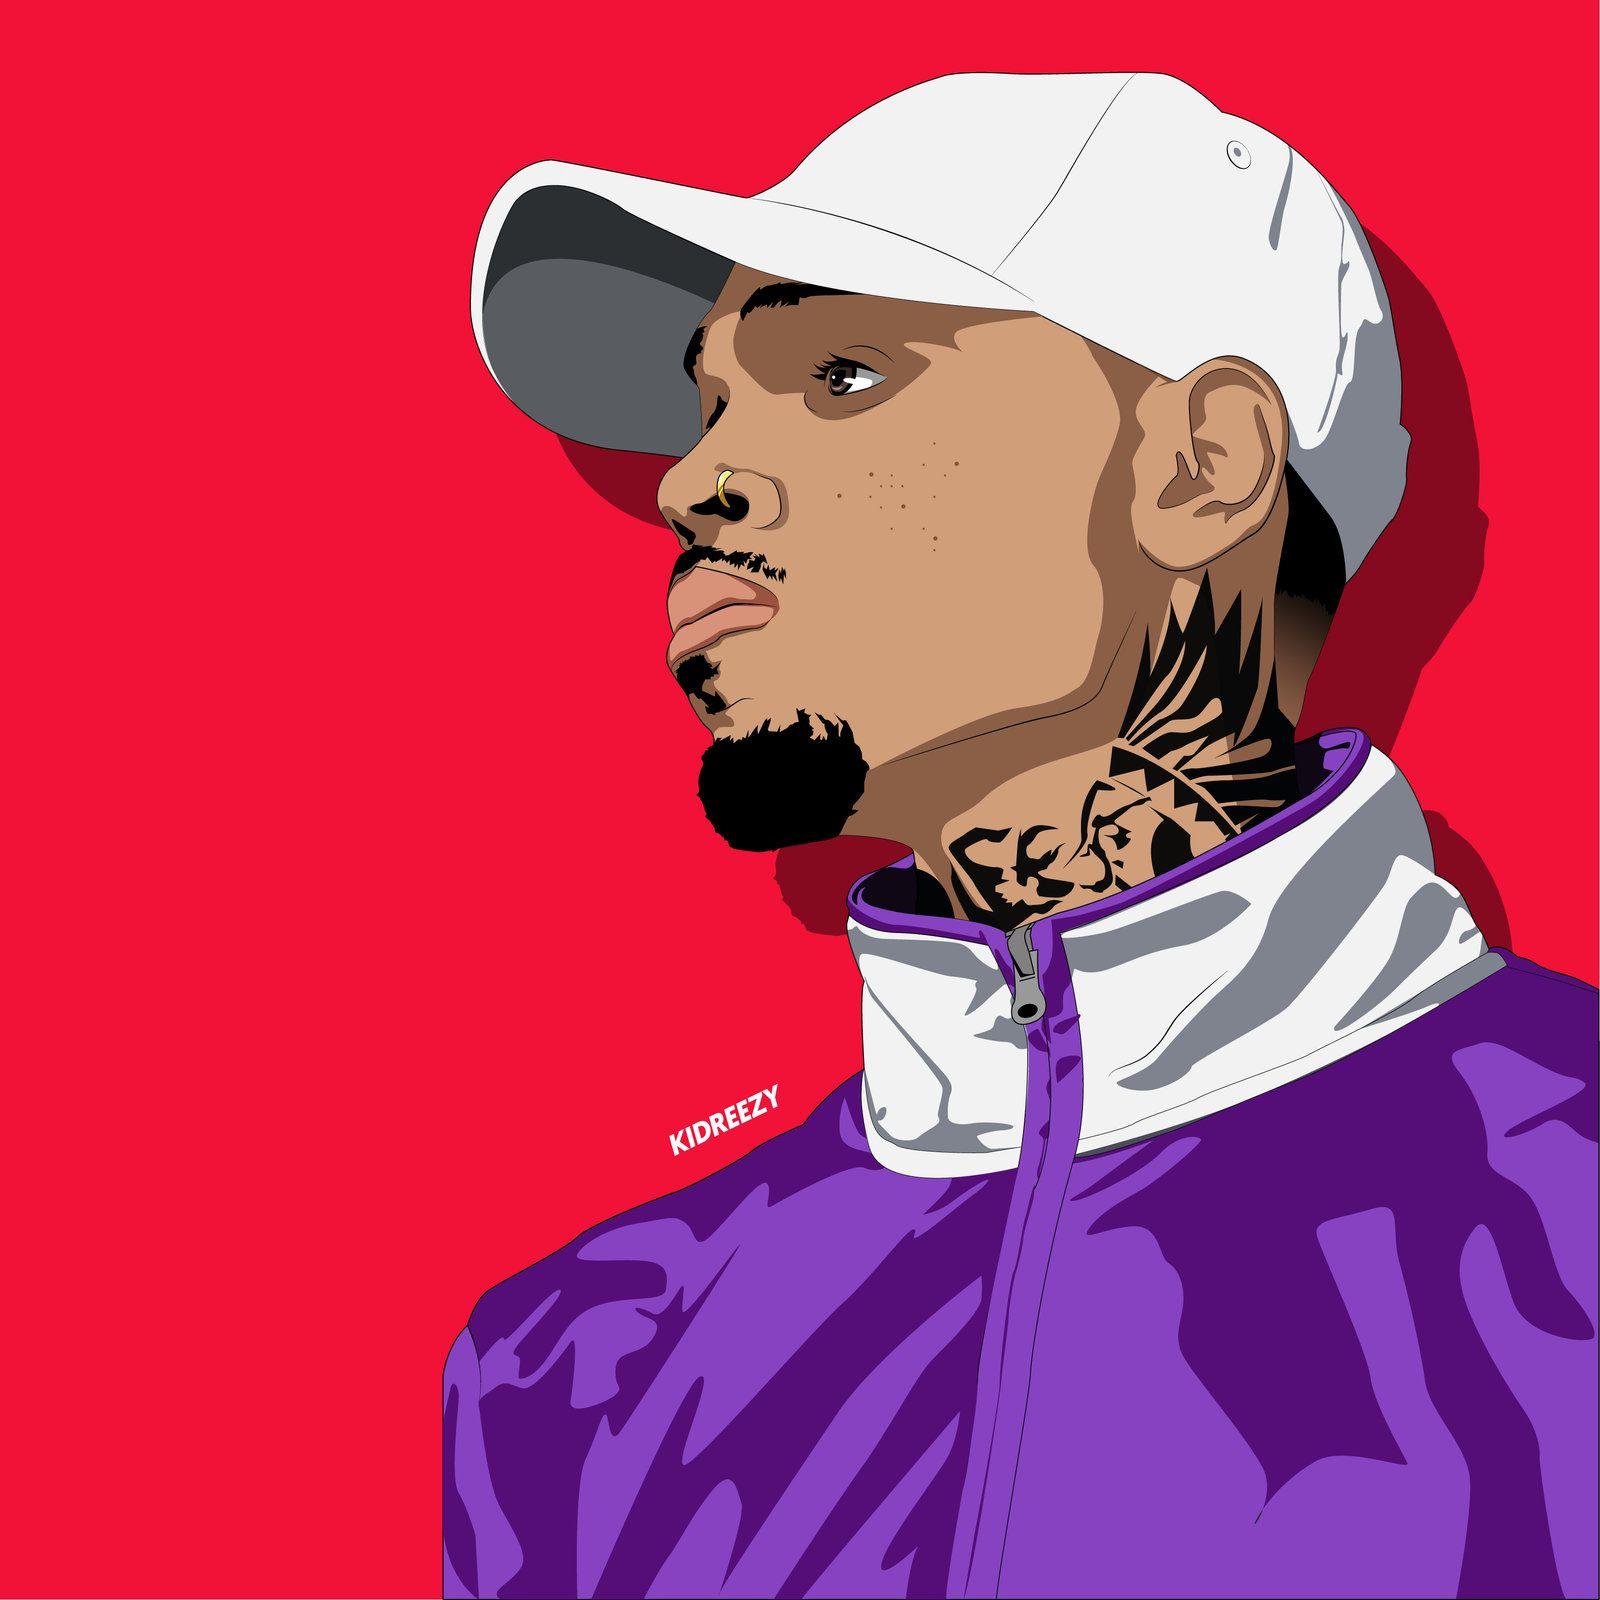 Chris Brown Animated Wallpapers Wallpaper Cave